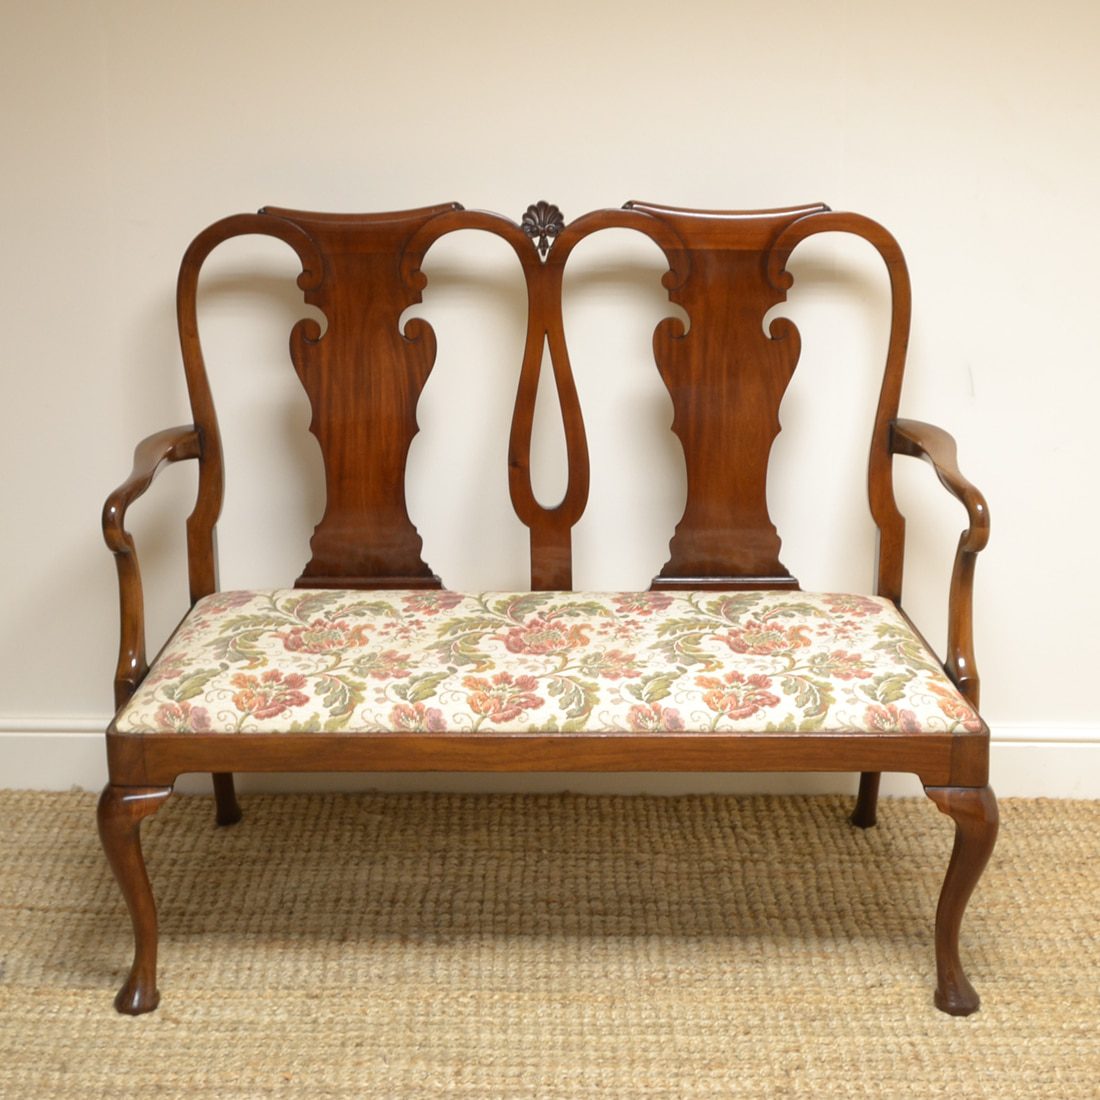 quality edwardian mahogany antique double chairback settee